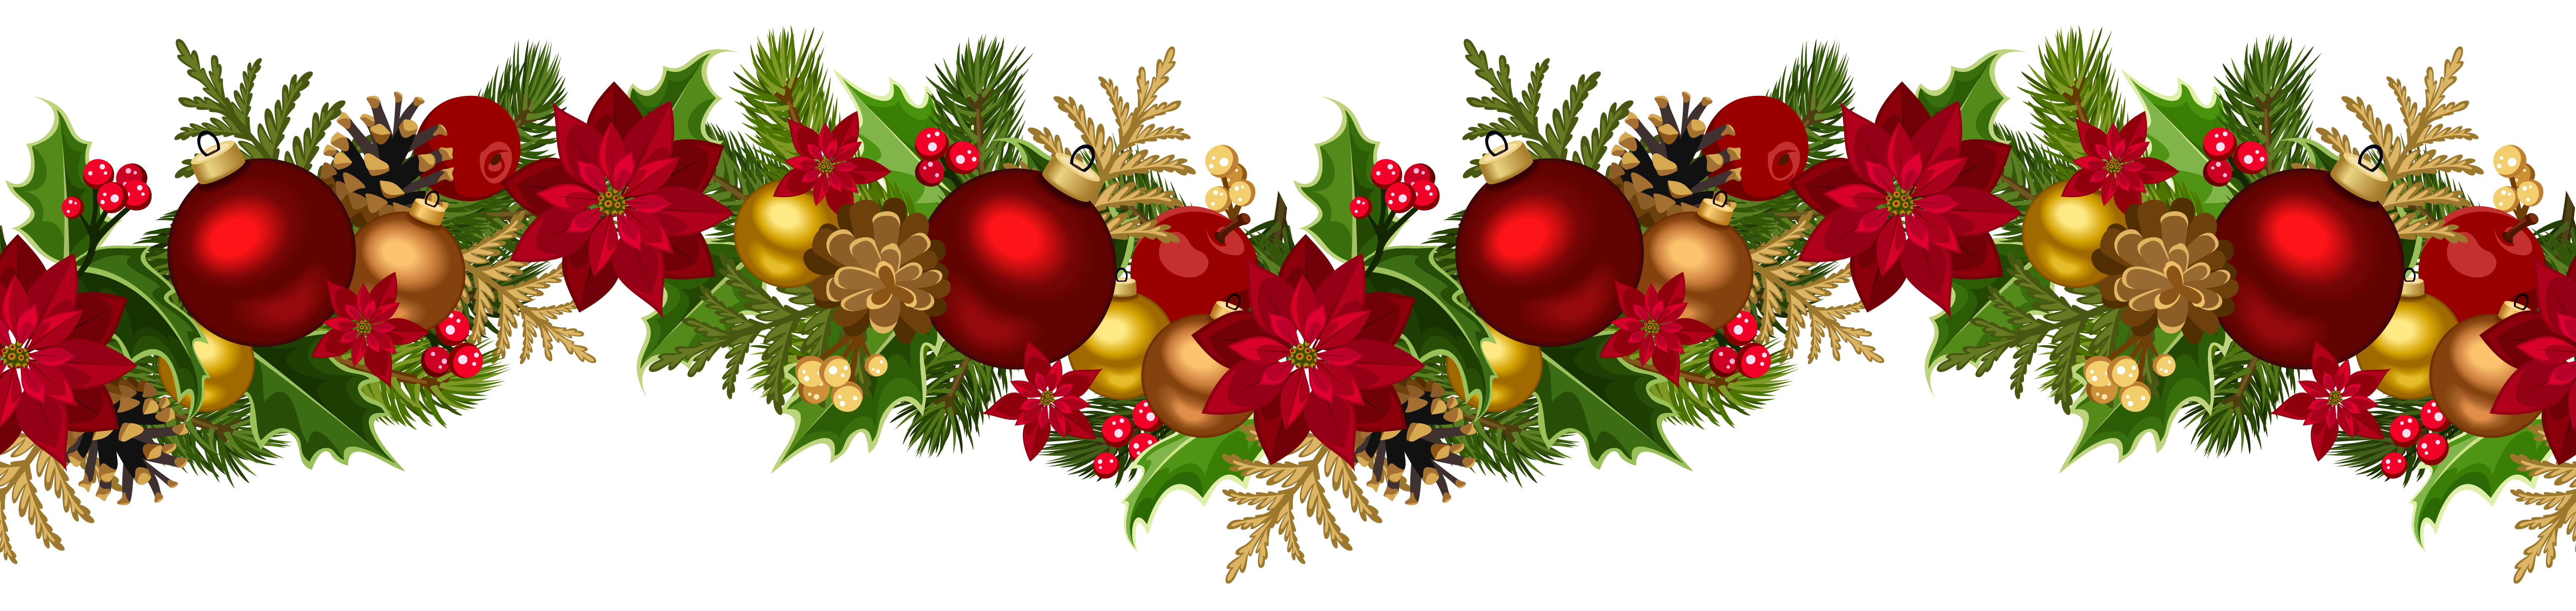 borders-and-frames-christmas-garland-clip-art-decorative-png-download